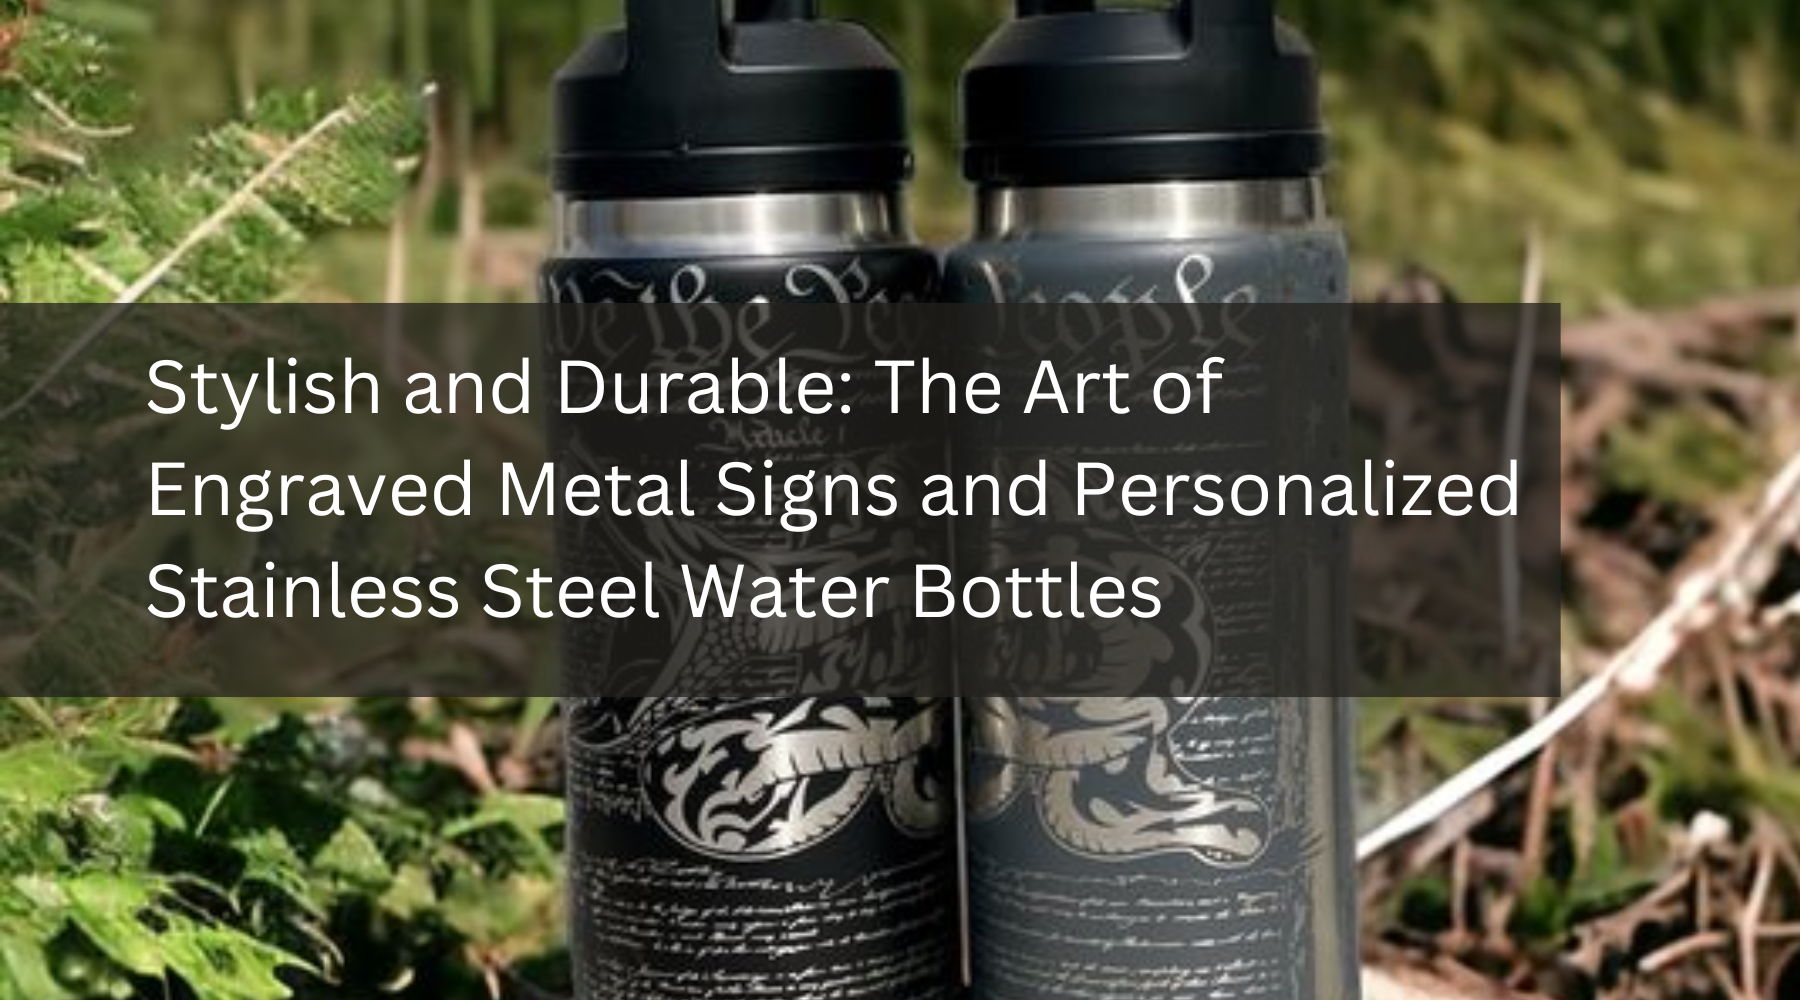 Stylish and Durable: The Art of Engraved Metal Signs and Personalized Stainless Steel Water Bottles